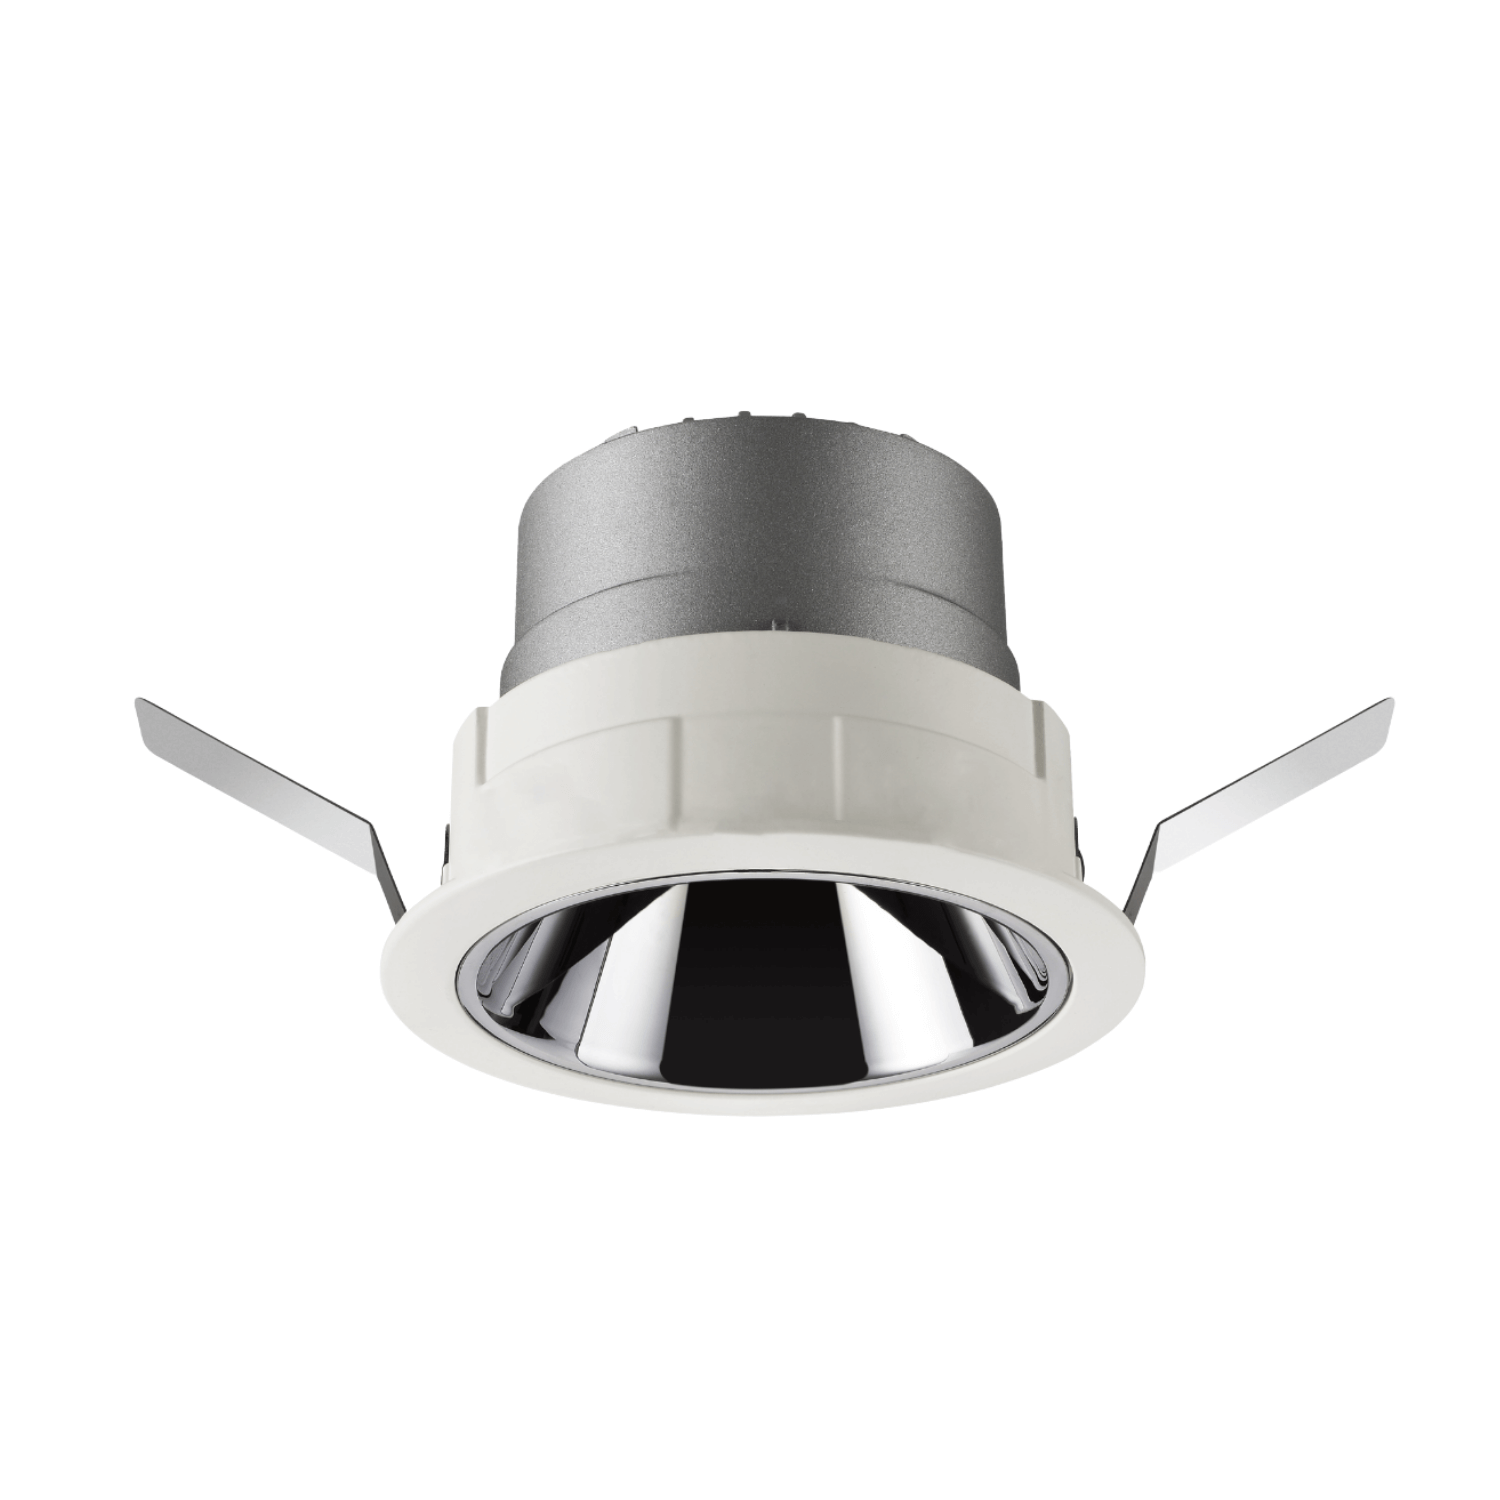 8W Low Profile Architectural LED Downlight